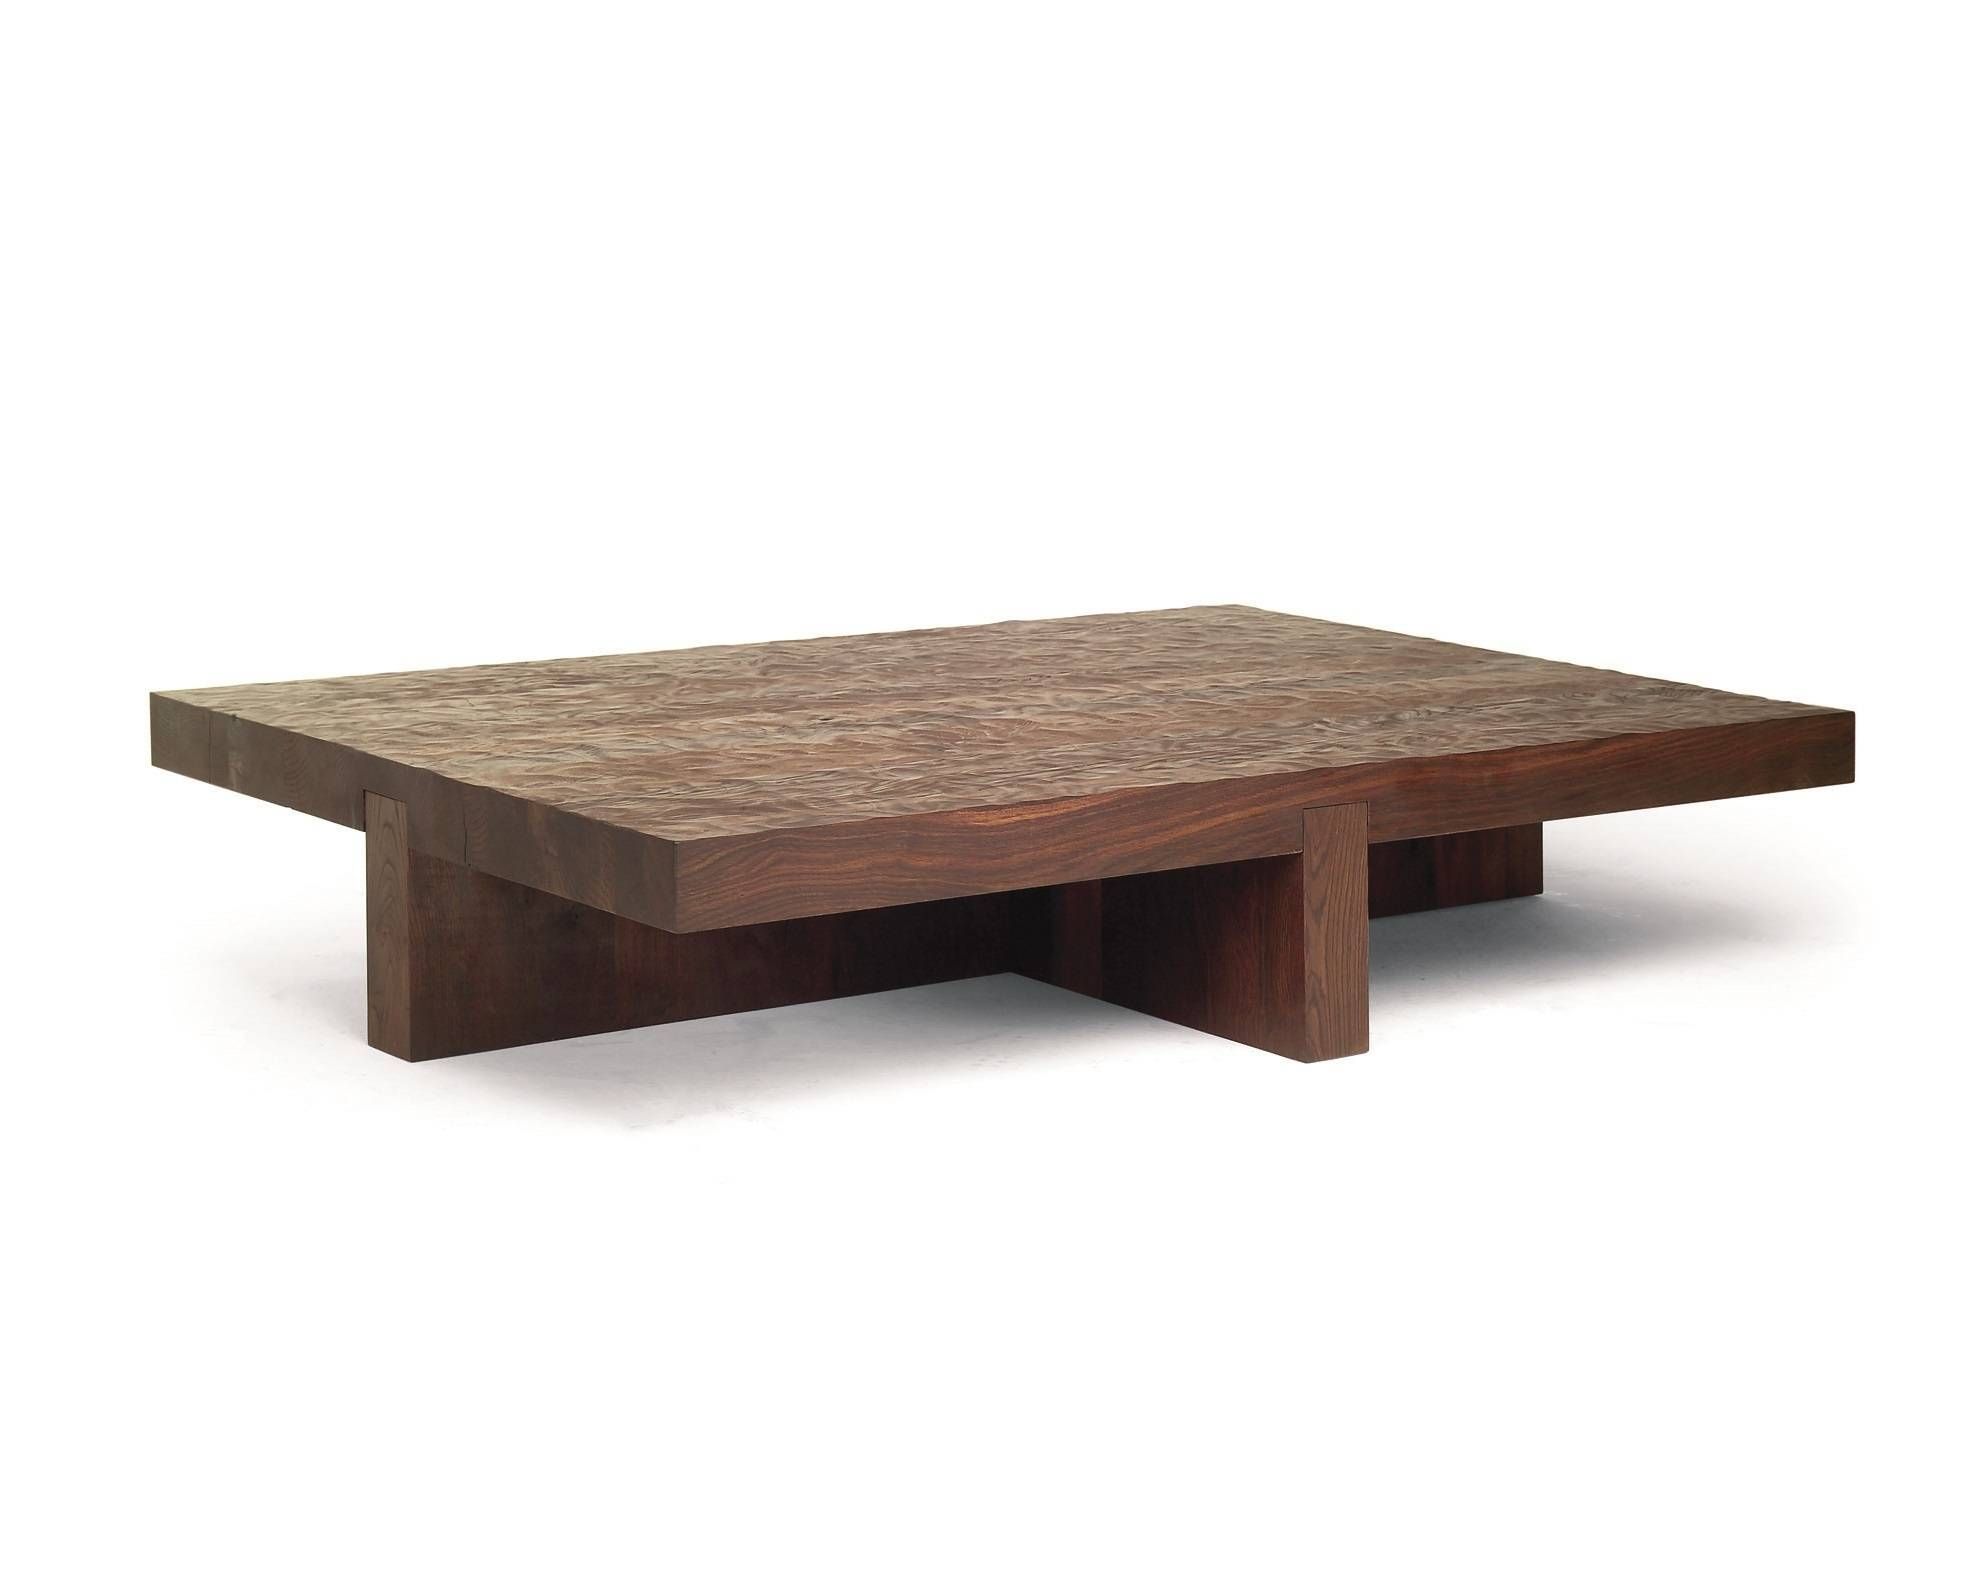 Low Level Oak Coffee Table – Coffee Addicts For Large Low Level Coffee Tables (View 4 of 30)